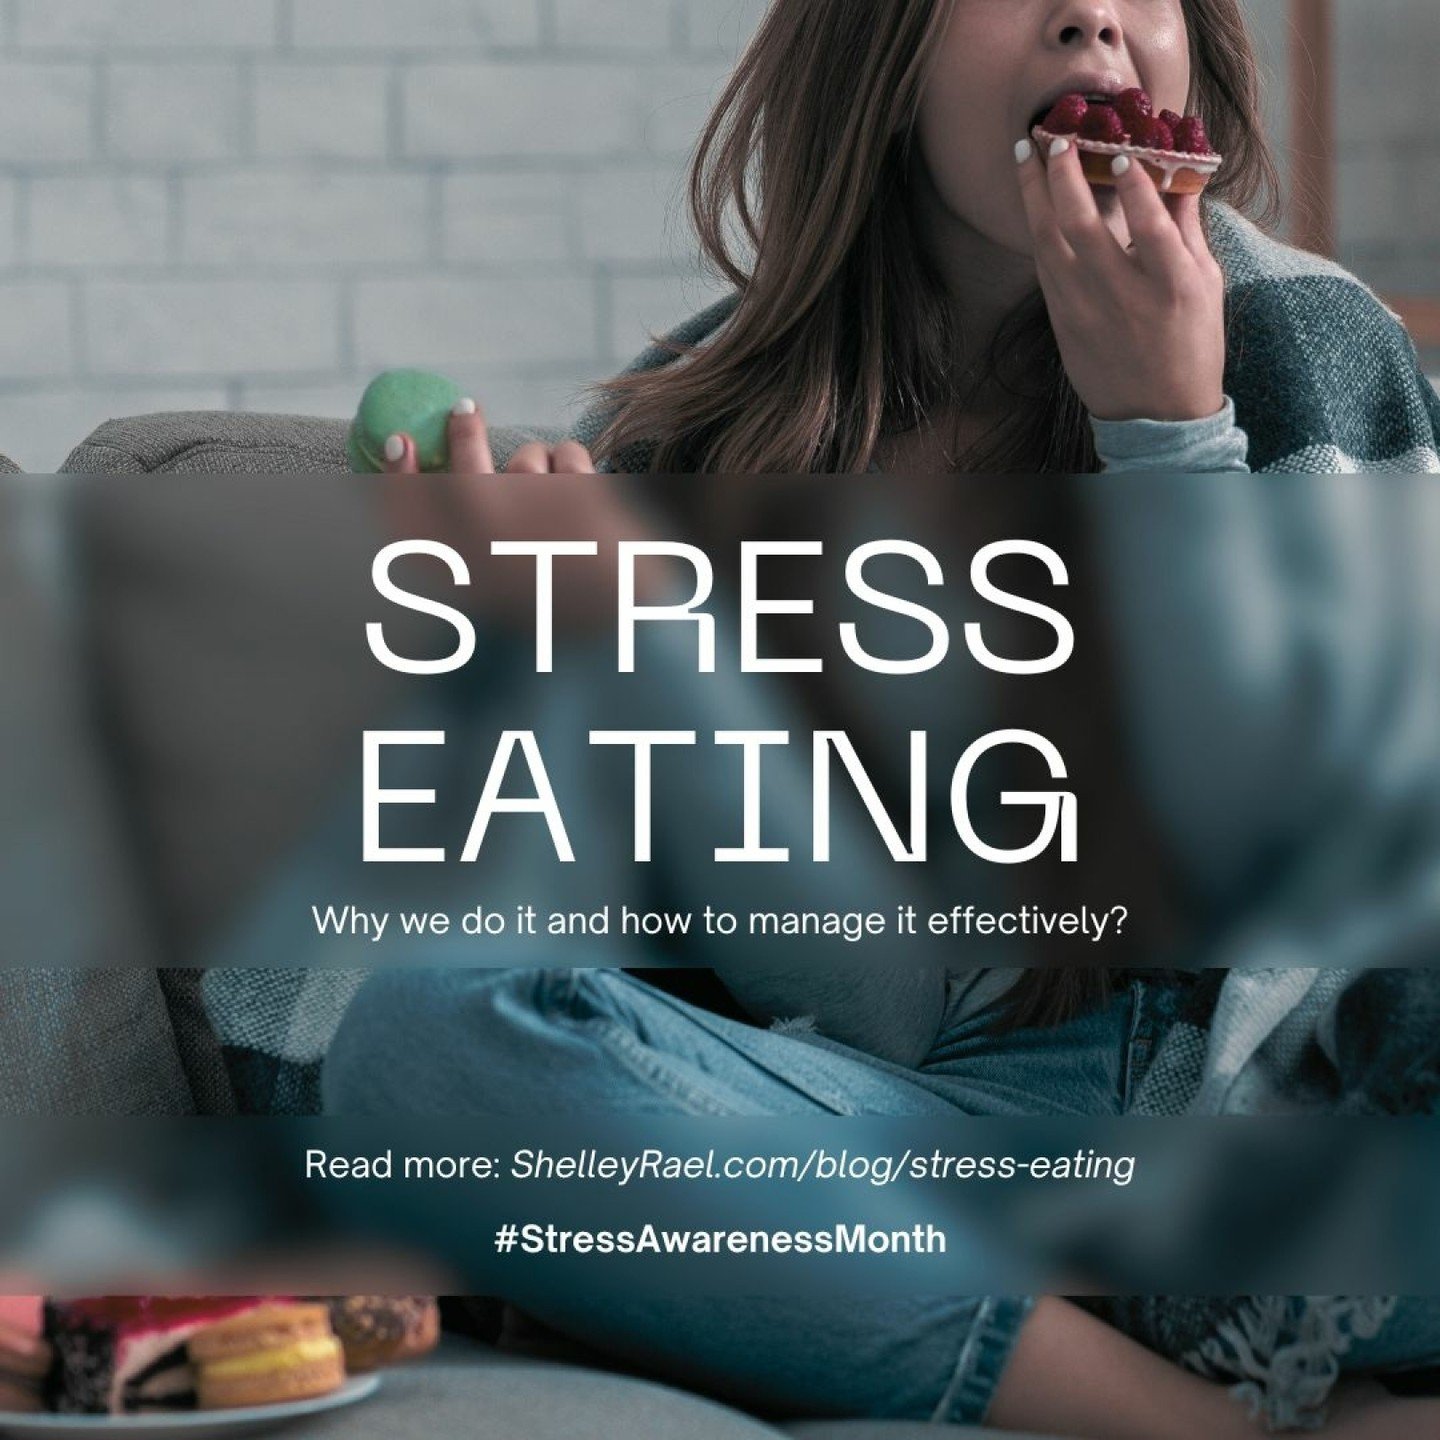 🫨Feeling overwhelmed by stress? 

🙂You're not alone! 

💛April is #StressAwarenessMonth, and it's the perfect time to explore how stress impacts our relationship with food. 

🍽️ My latest blog post addresses stress eating - why we do it and how to